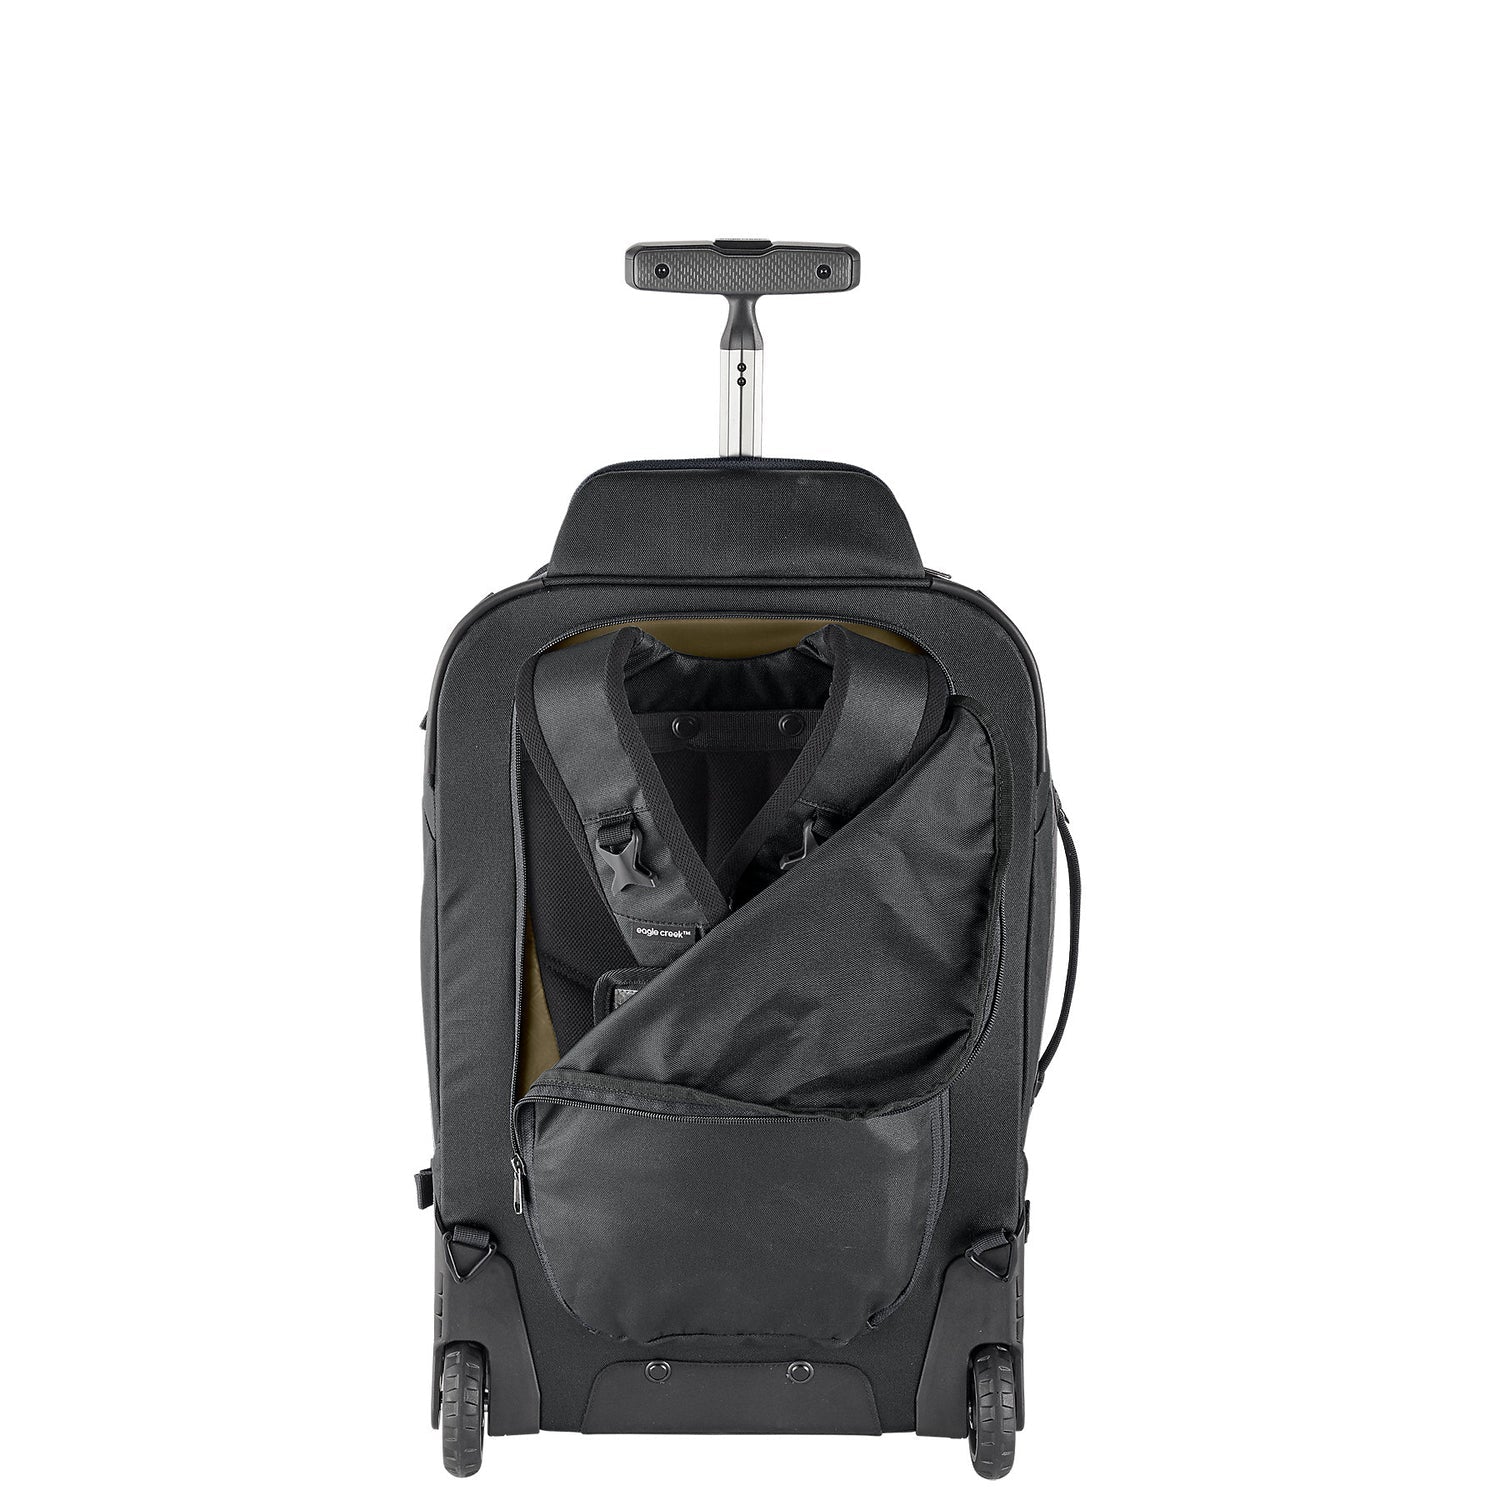 GEAR WARRIOR™ CONVERTIBLE 21.75" CARRY ON BACKPACK